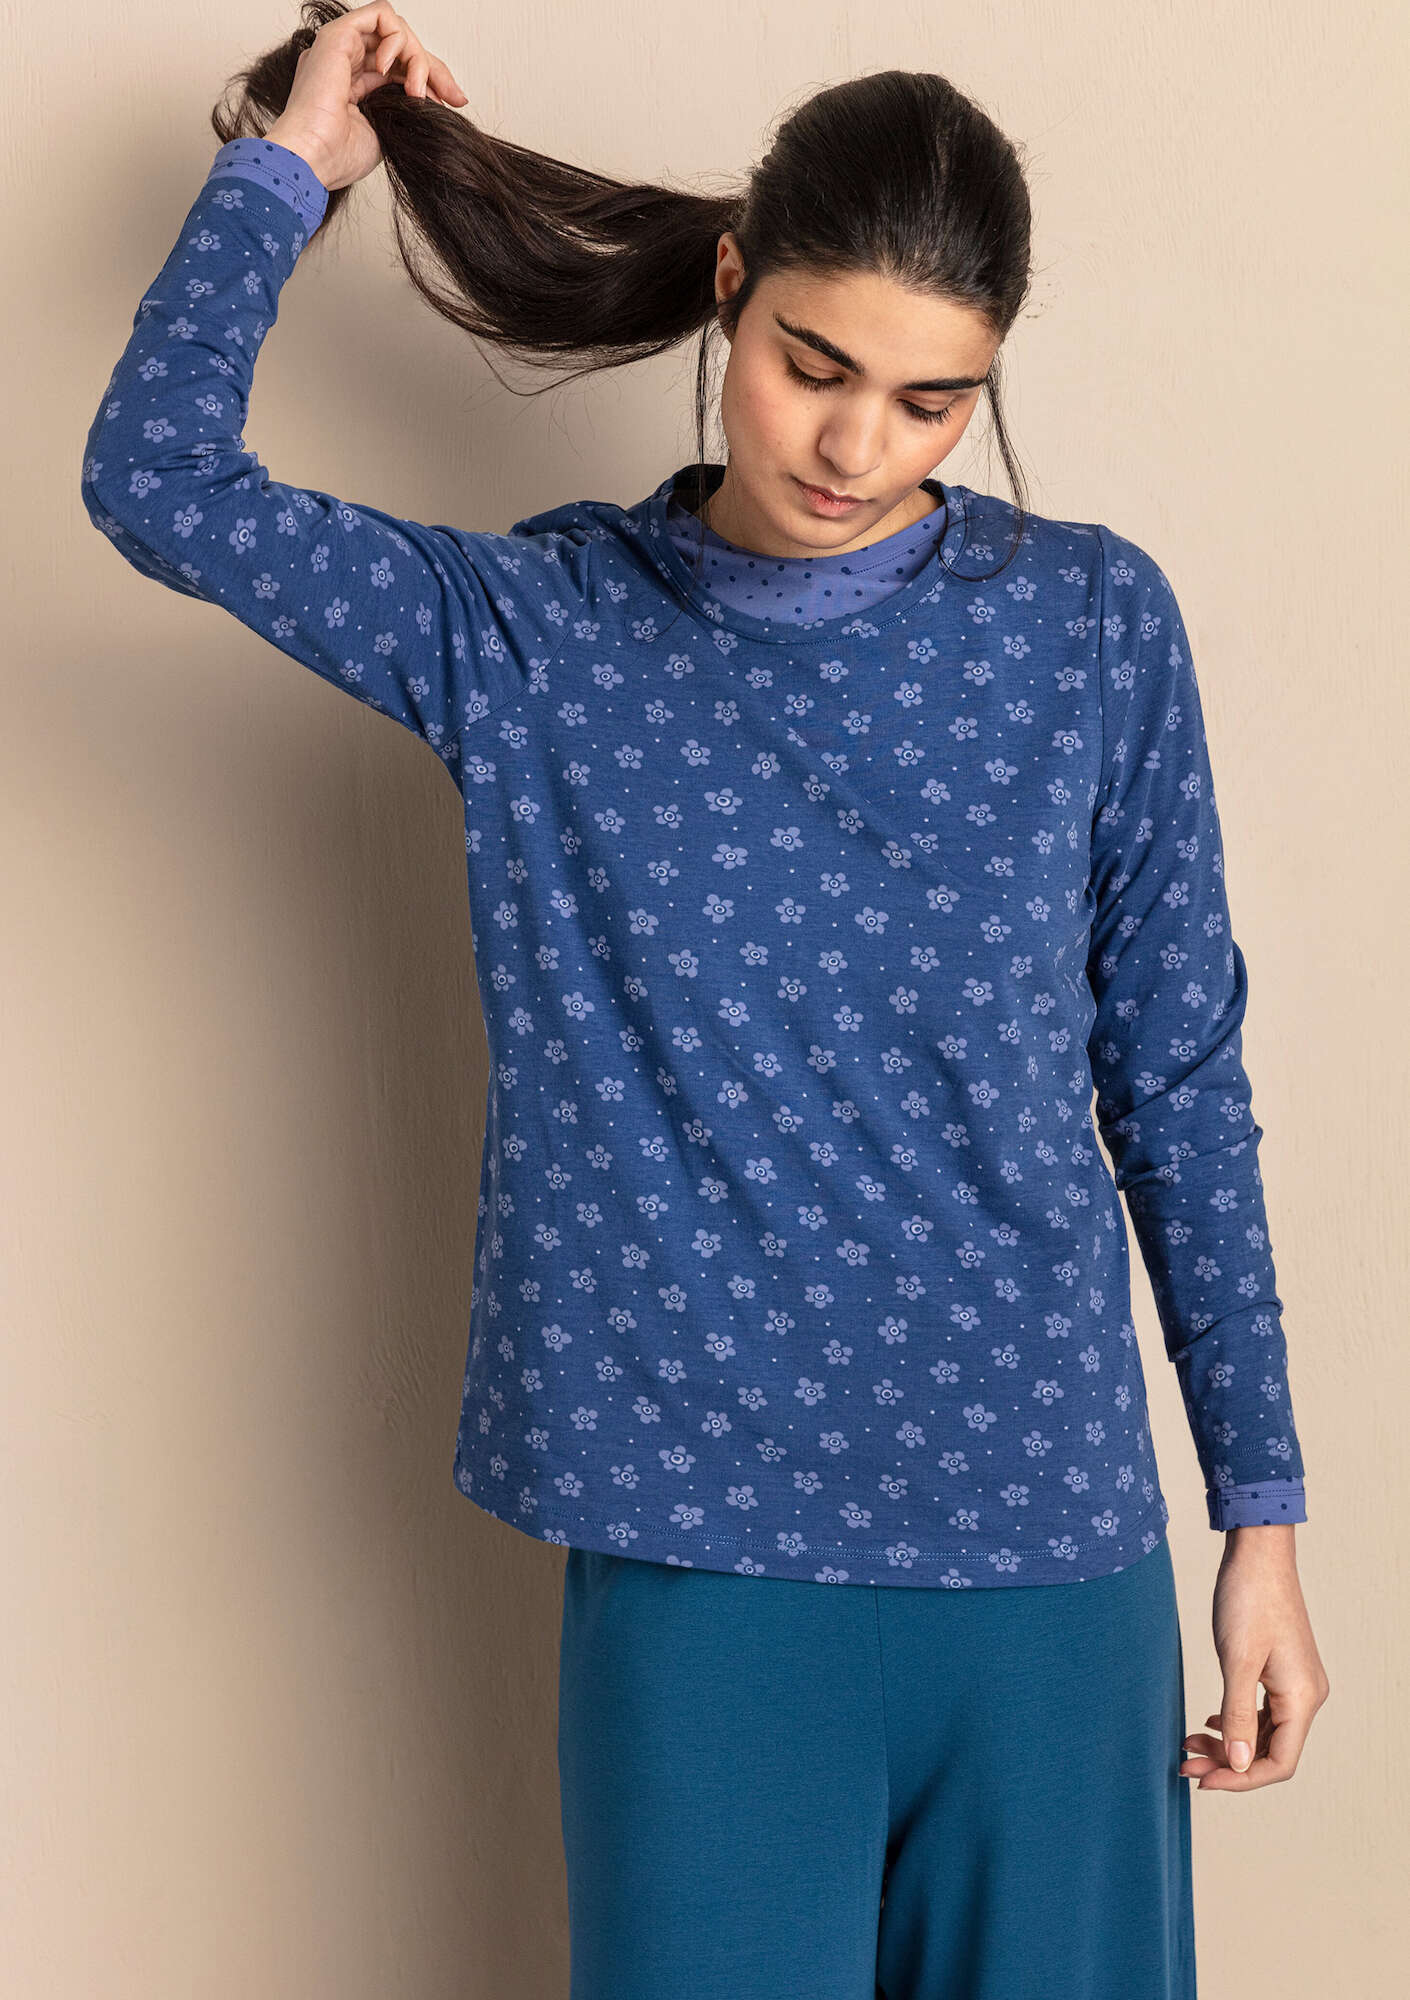 “Pytte” jersey top in organic cotton/spandex indigo blue/patterned